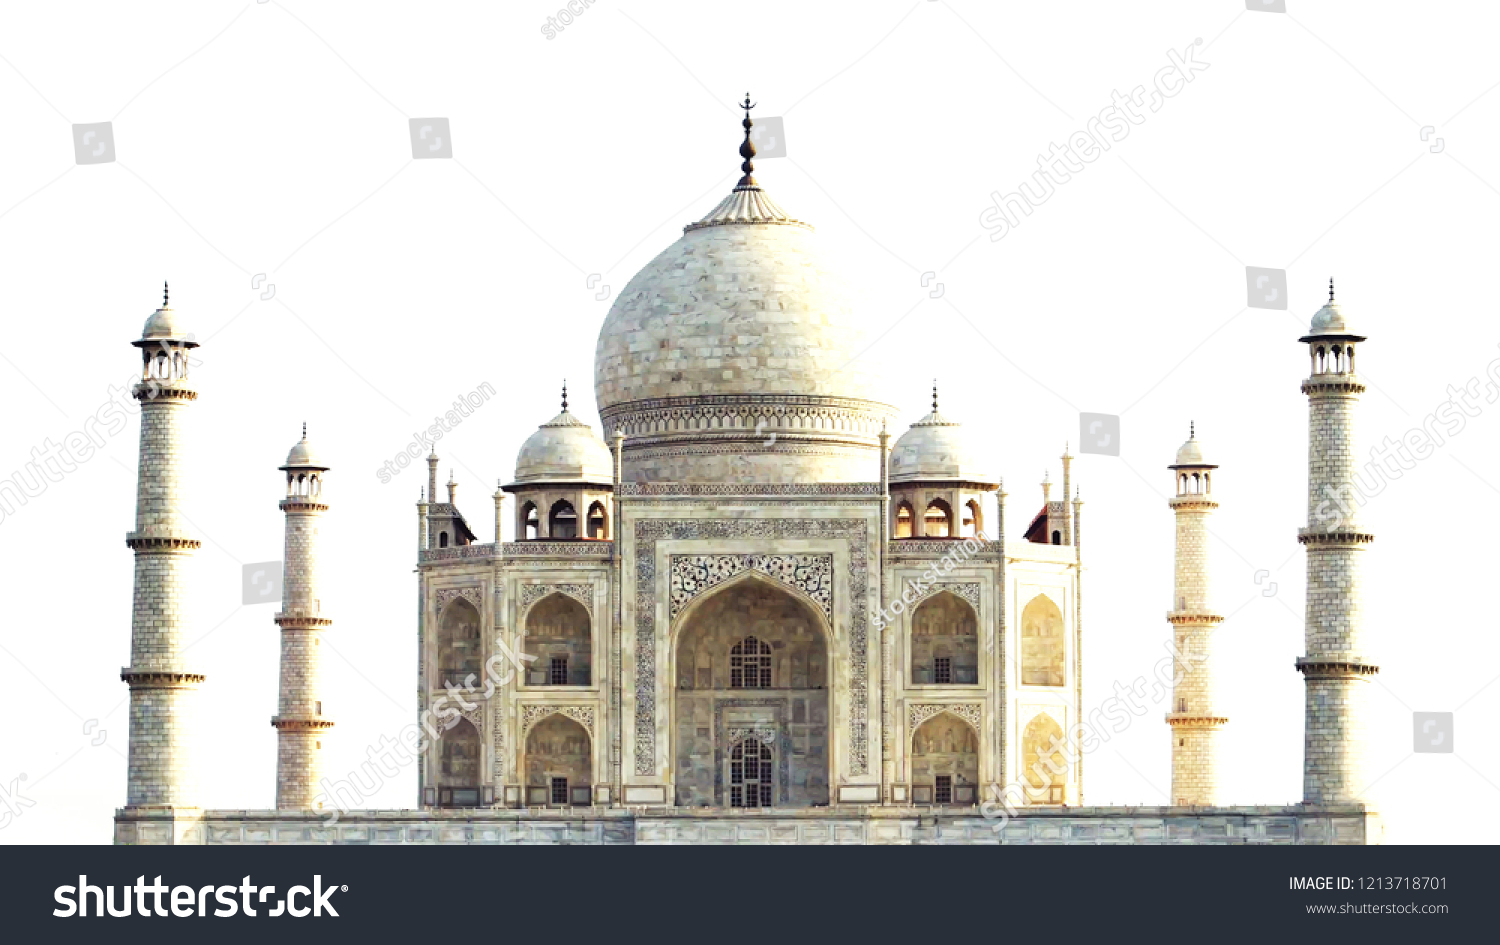 Taj Mahal in Agra, India, no people, isolated on white background. #1213718701